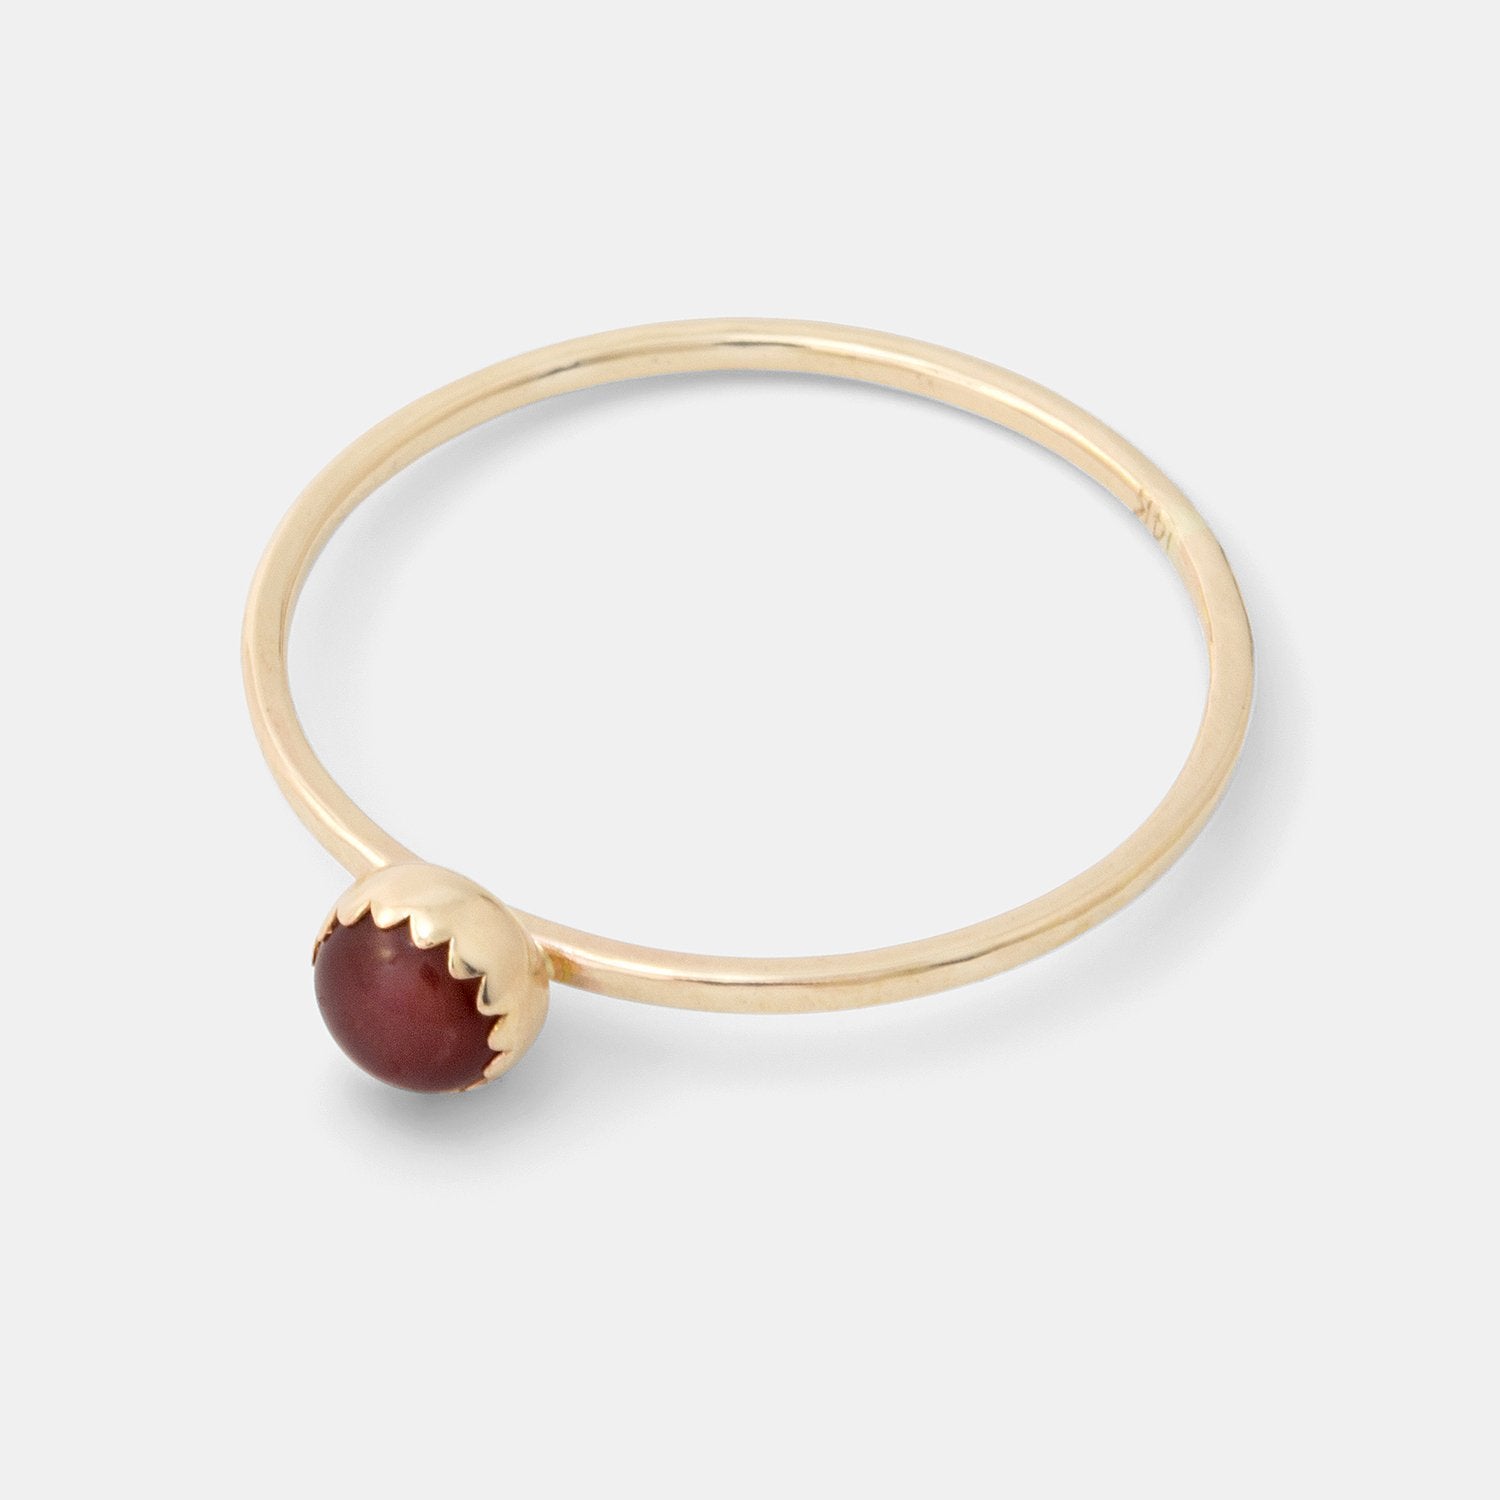 Carnelian & solid gold stacking ring - Simone Walsh Jewellery Australia